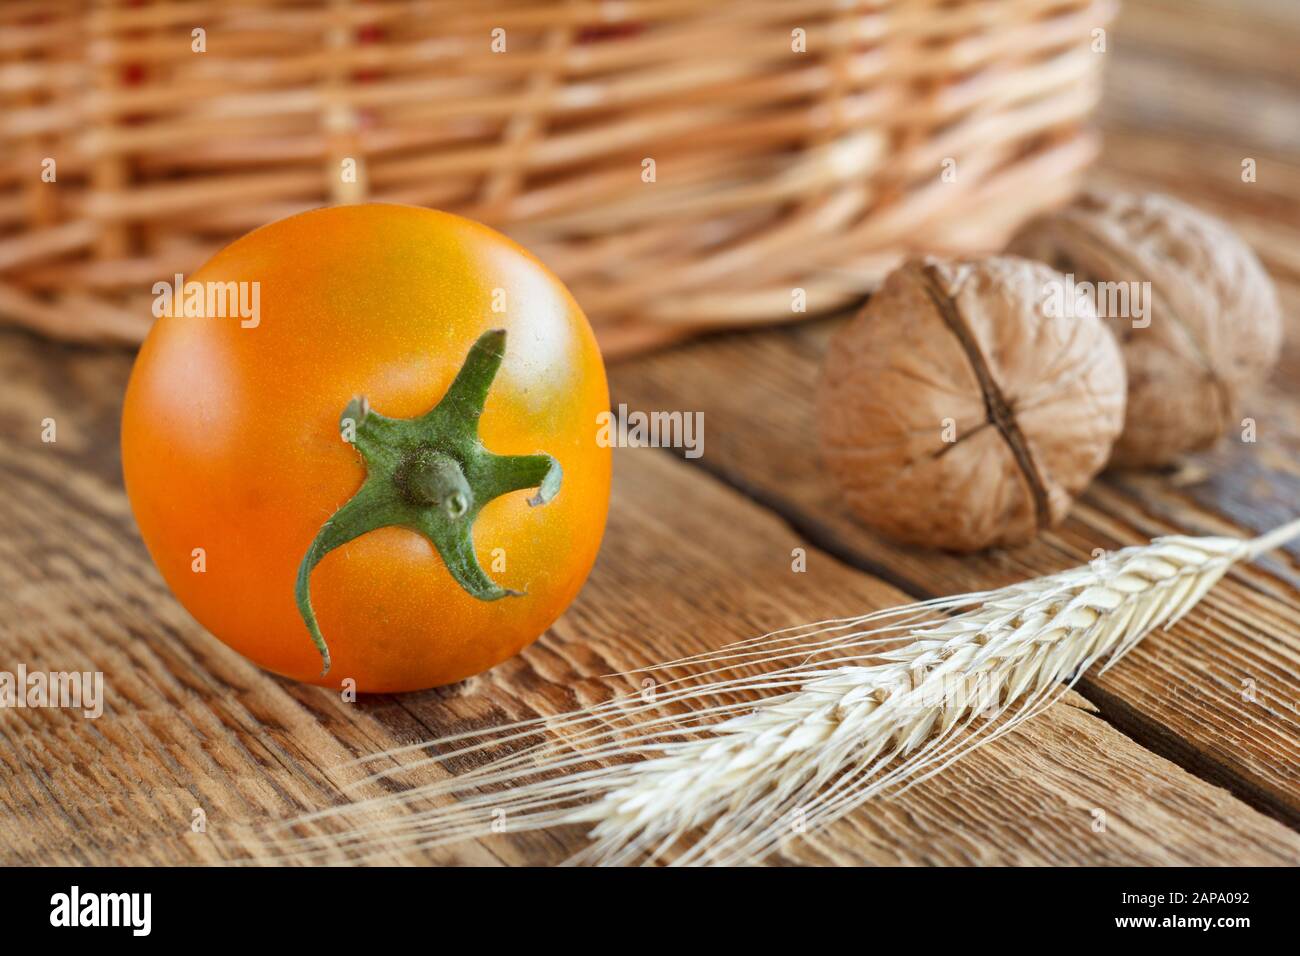 Close-up yellow tomato, walnuts, wheat ears and wicker basket on wooden background. Shallow depth of field. Stock Photo